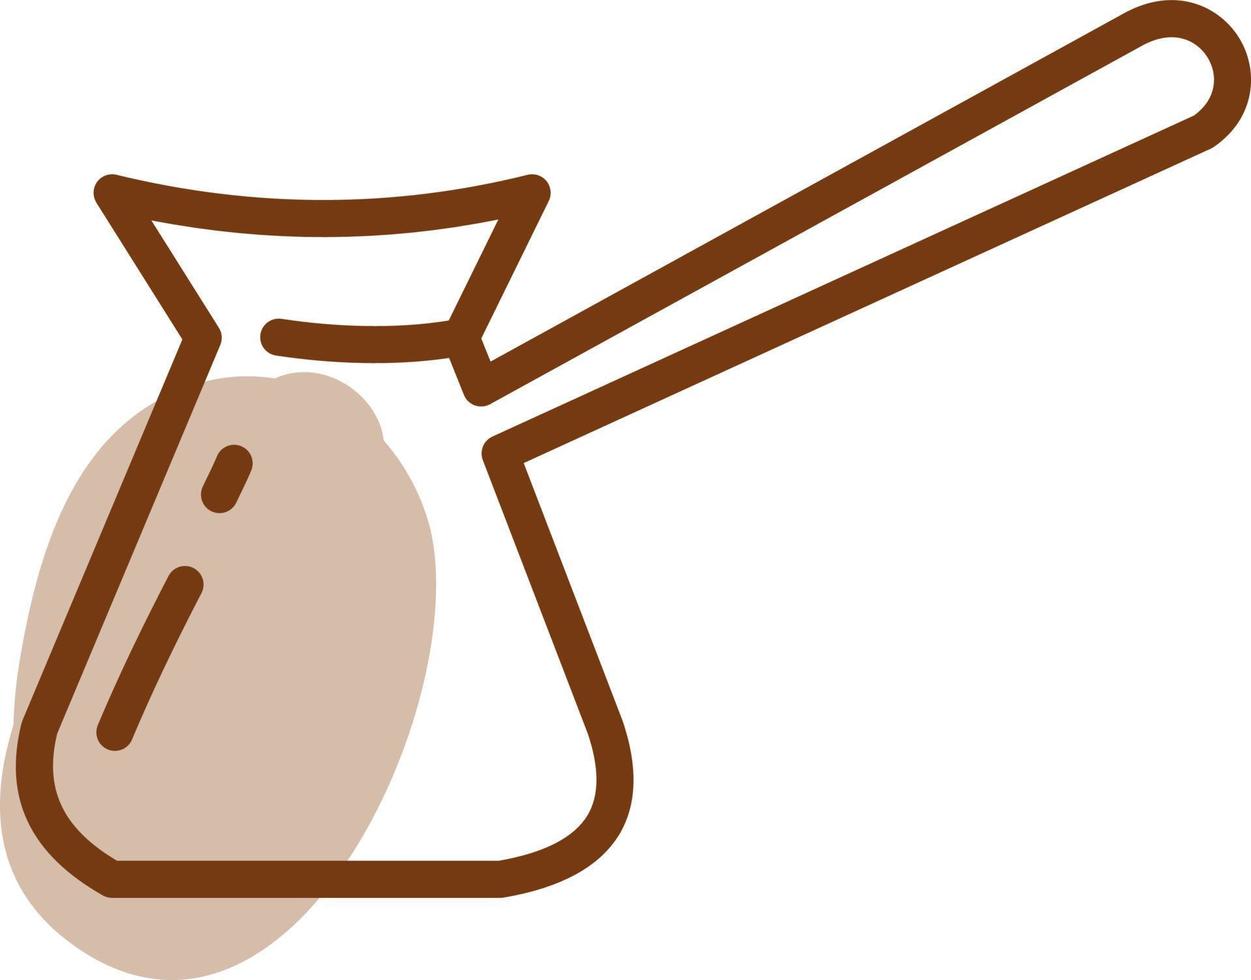 Coffee cezve, illustration, vector on a white background.